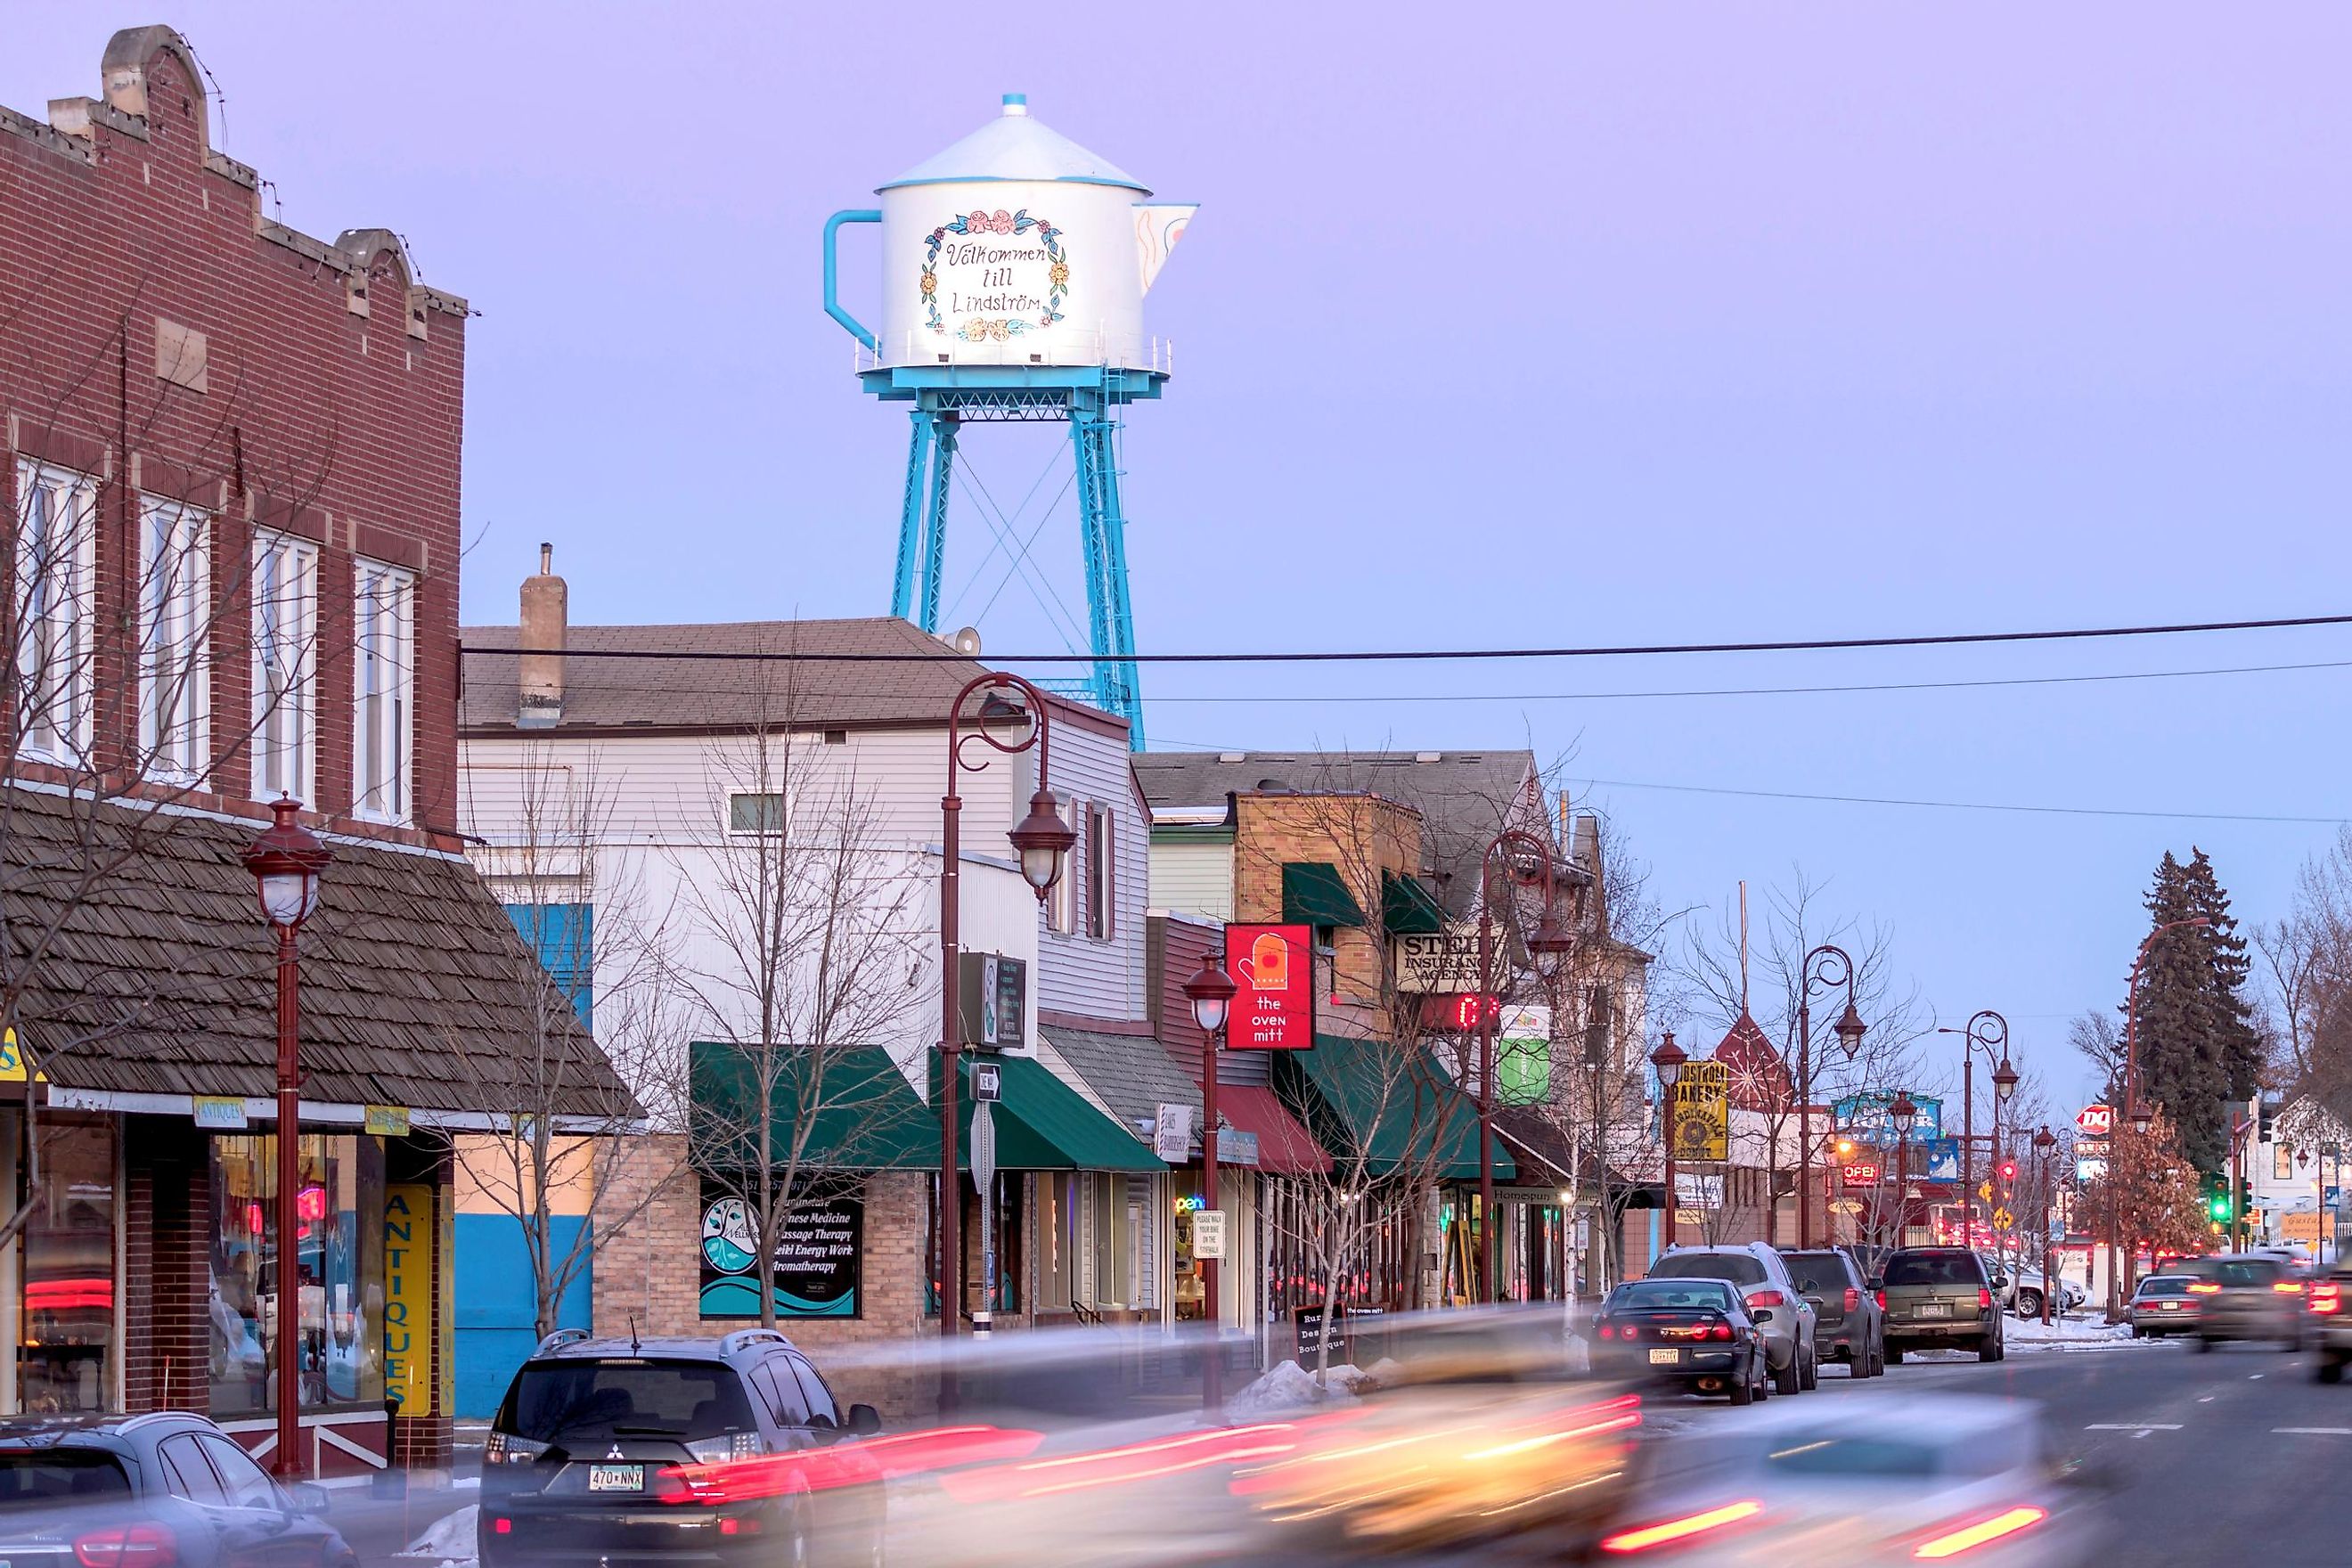 Rural Lindstrom, Minnesota and the Iconic Teapot Water Tower. Image credit Sam Wagner via Shutterstock